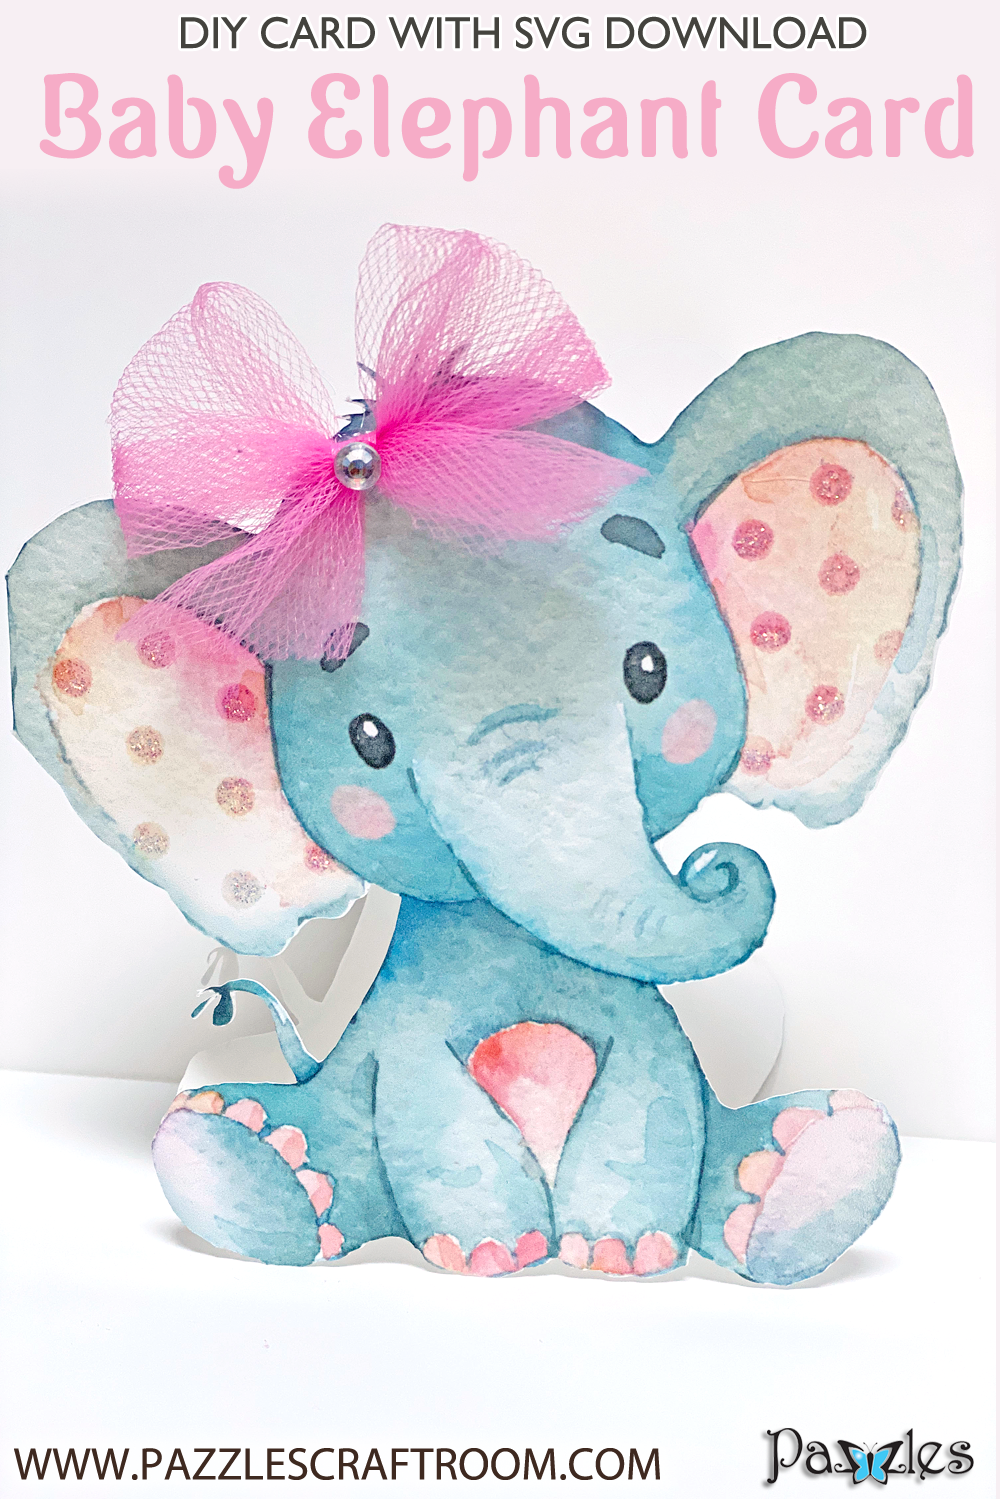 Pazzles DIY Cute Elephant Card with instant SVG download. Compatible with all major electronic cutters including Pazzles Inspiration, Cricut, and Silhouette Cameo. Design by Lisa Reyna.